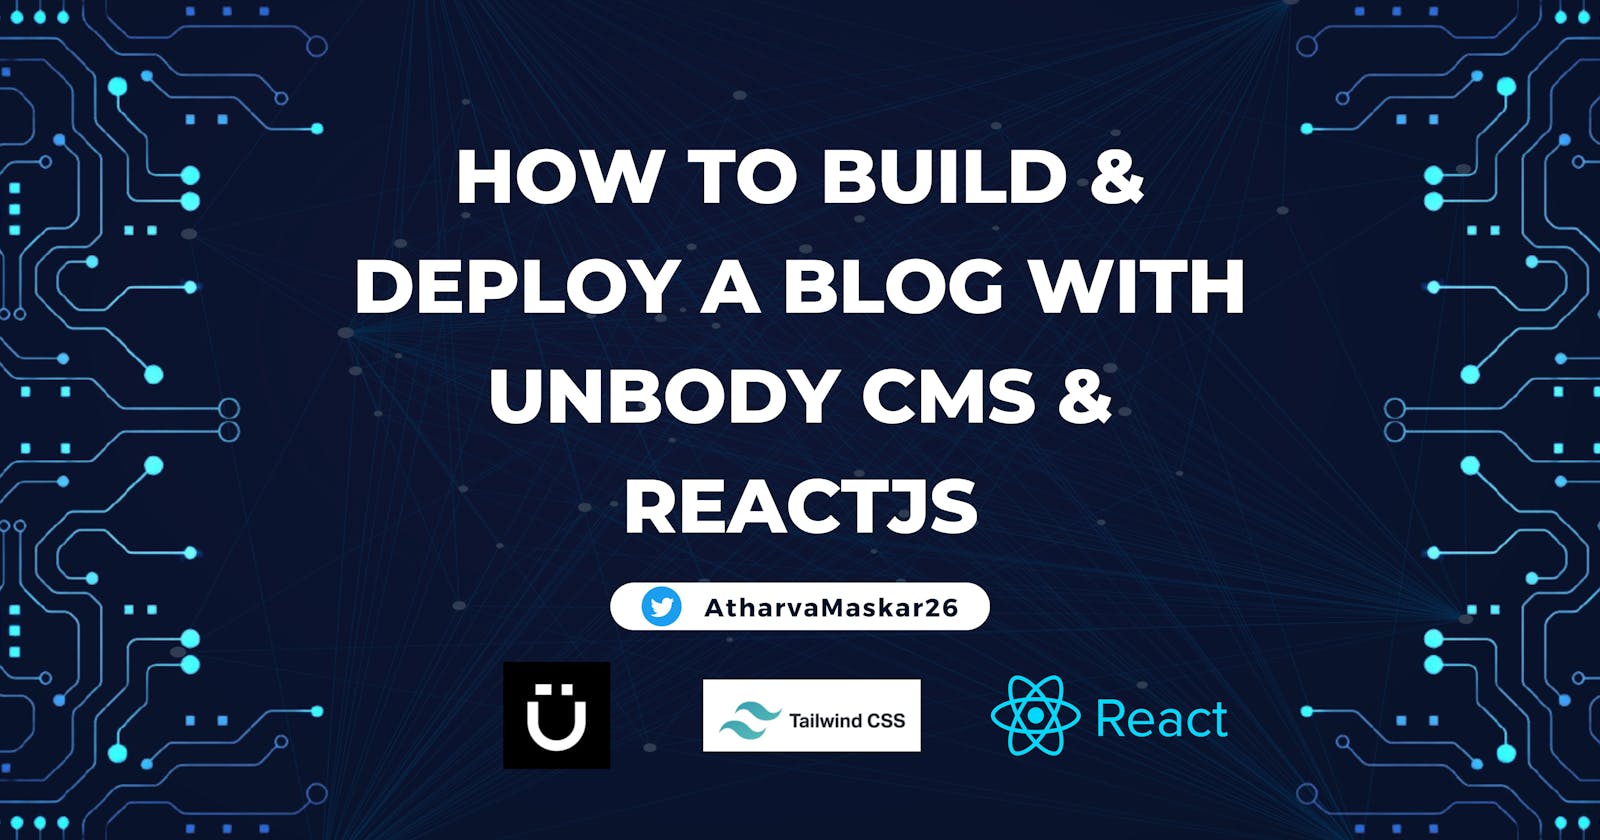 How to Build & Deploy a Blog with Unbody CMS & ReactJS